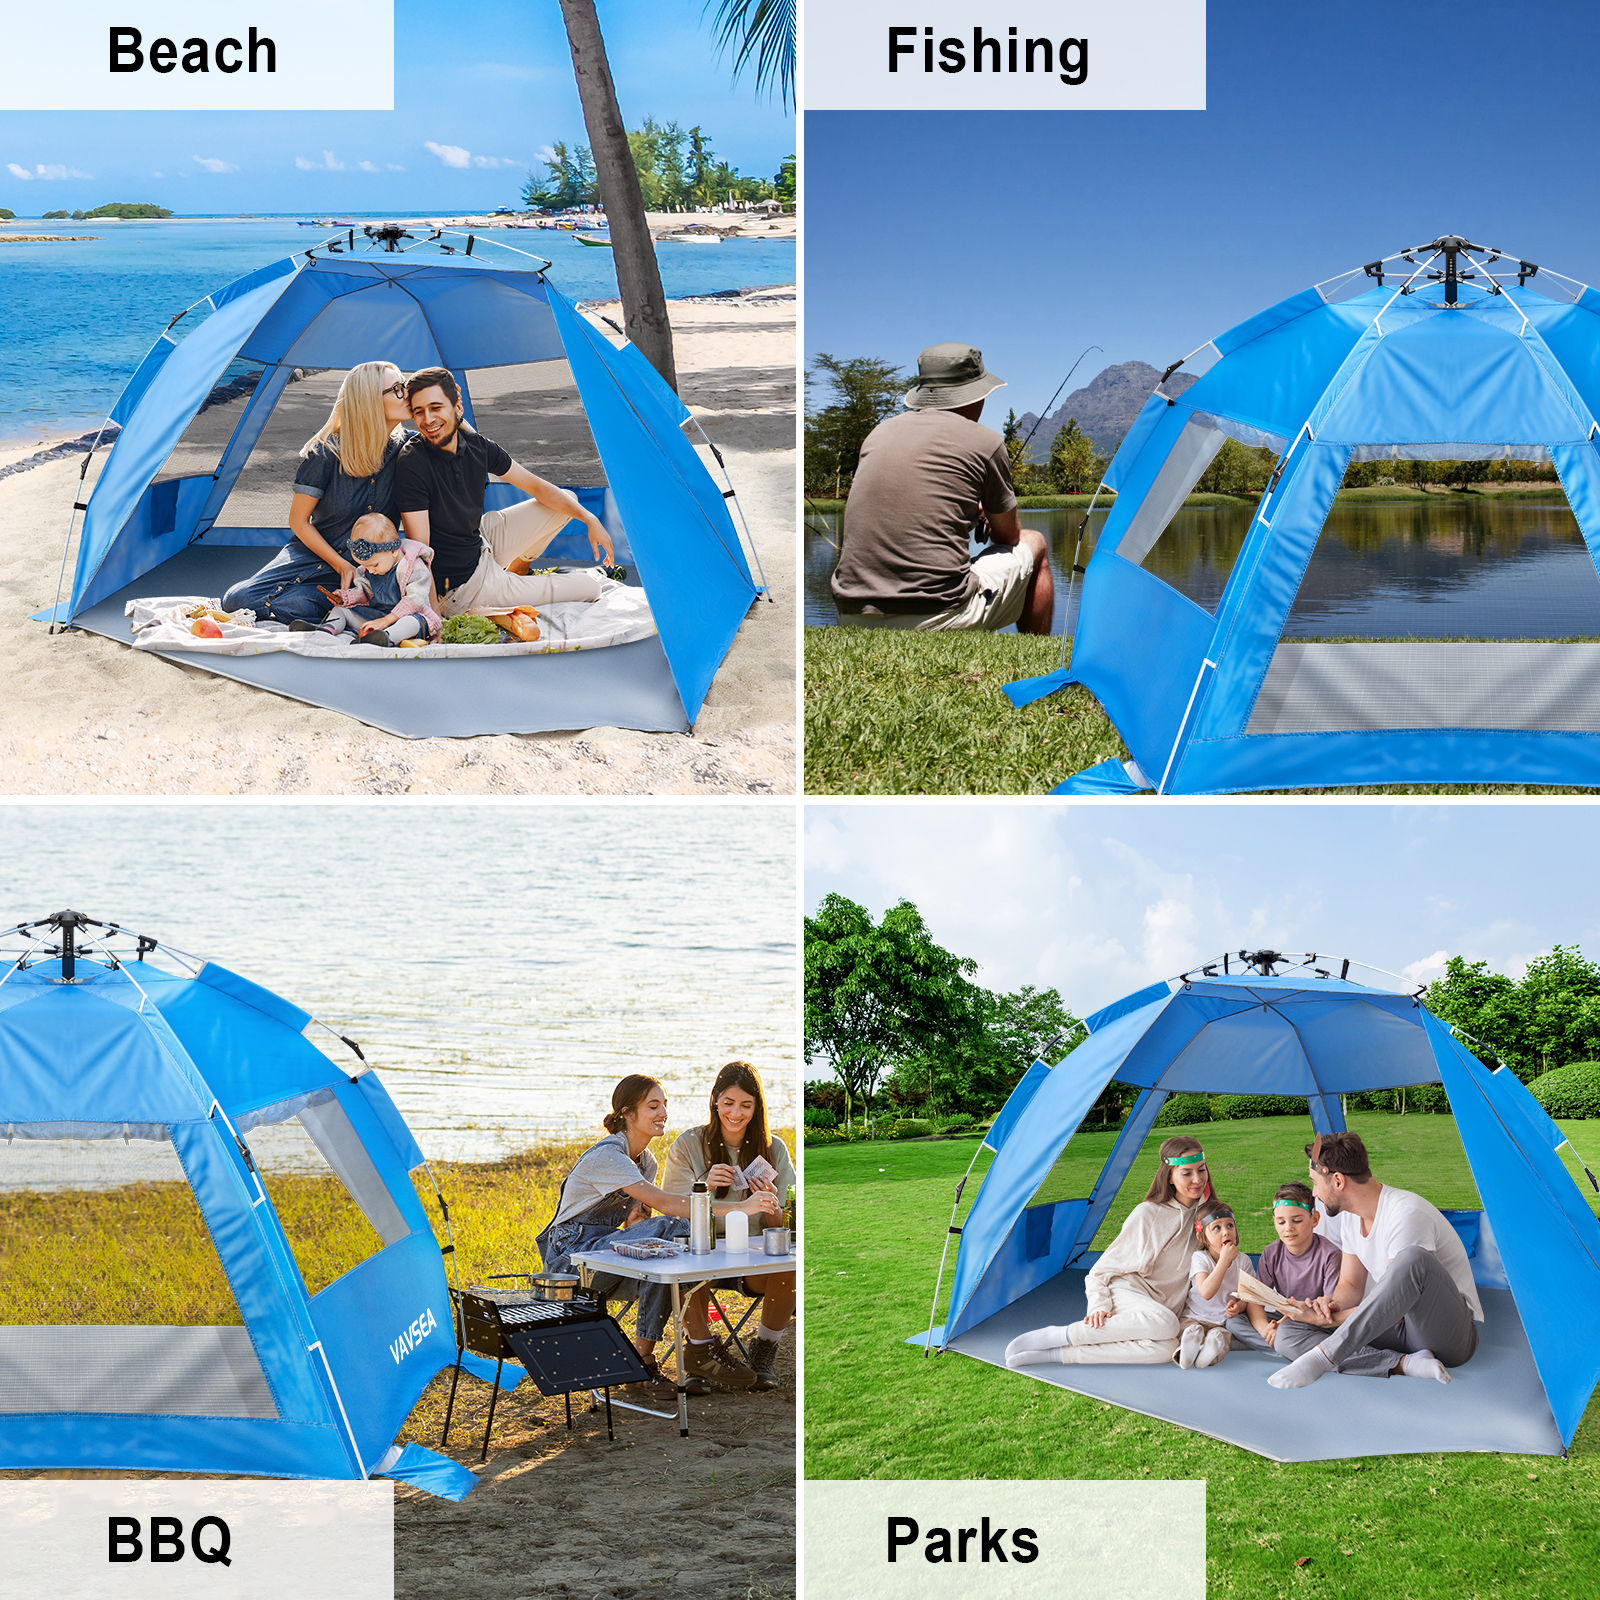 SUNOYAR Beach Tent, 4-6 Person Pop-up Beach Tent Sun Shelter, UPF 50+ UV Protection Portable Waterproof Beach Tent, Sunshade with Extendable Floor for Family, Fishing, Camping, Blue - image 4 of 8